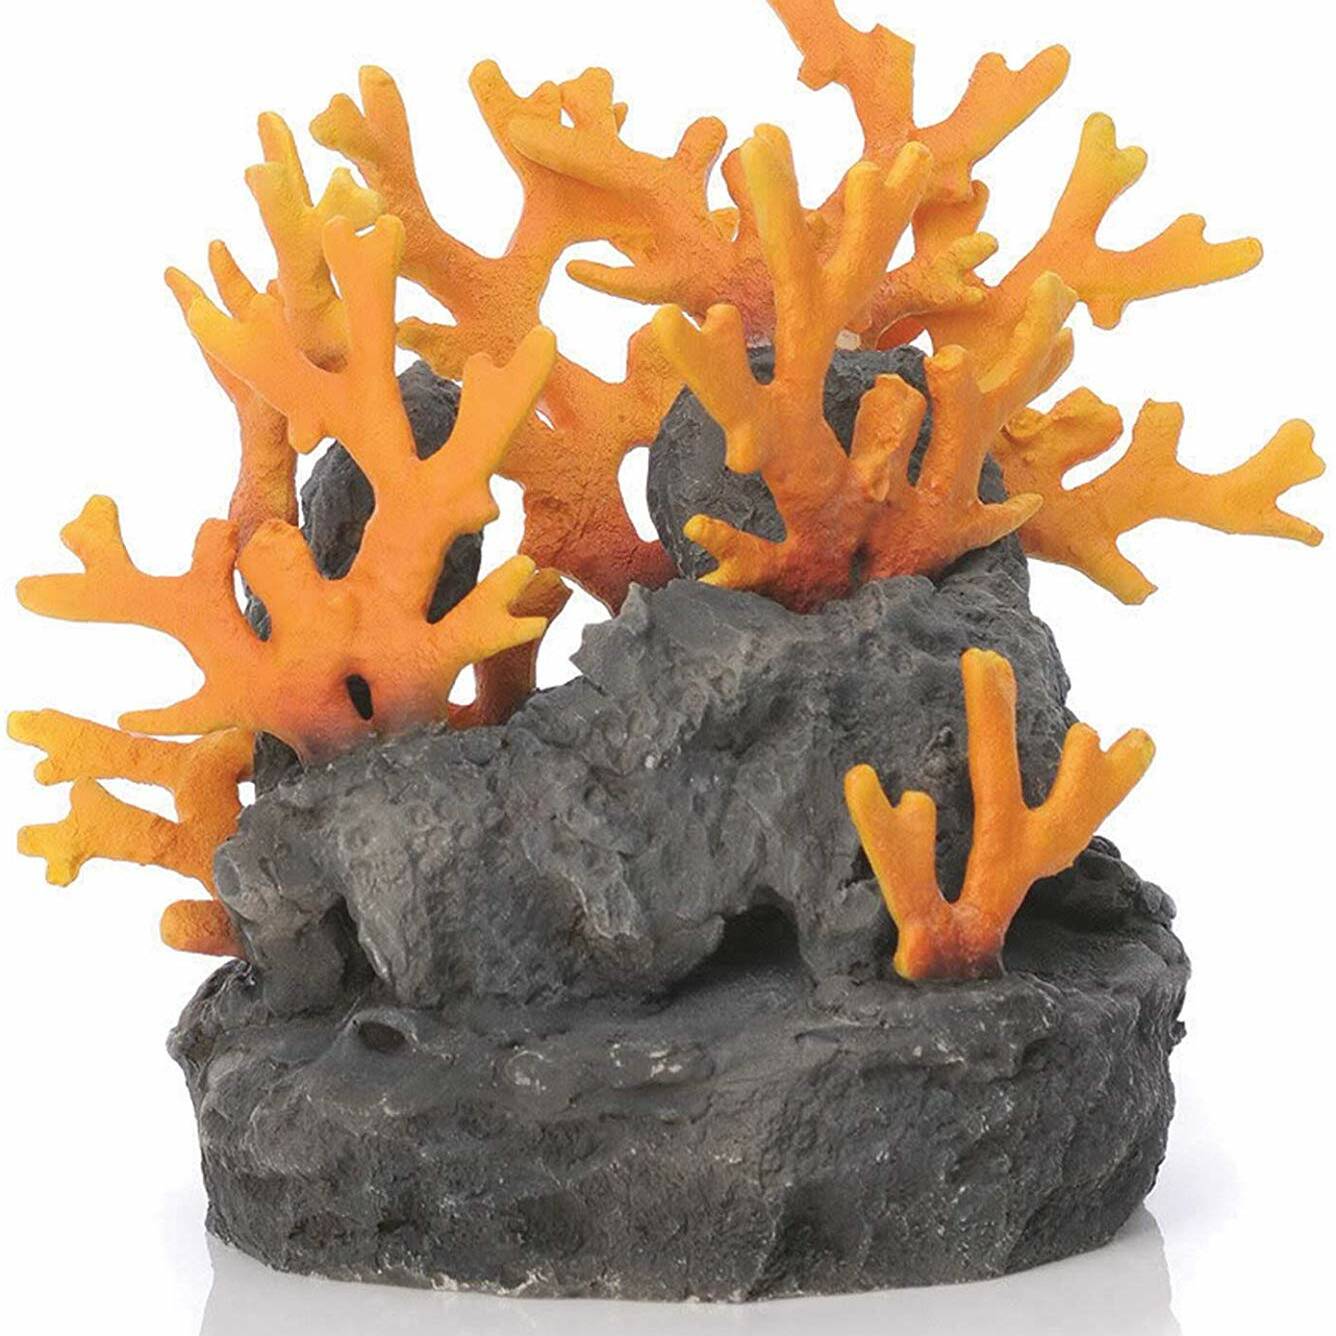 Oase biOrb Large Lava Rock With Fire Coral Ornament (46123)